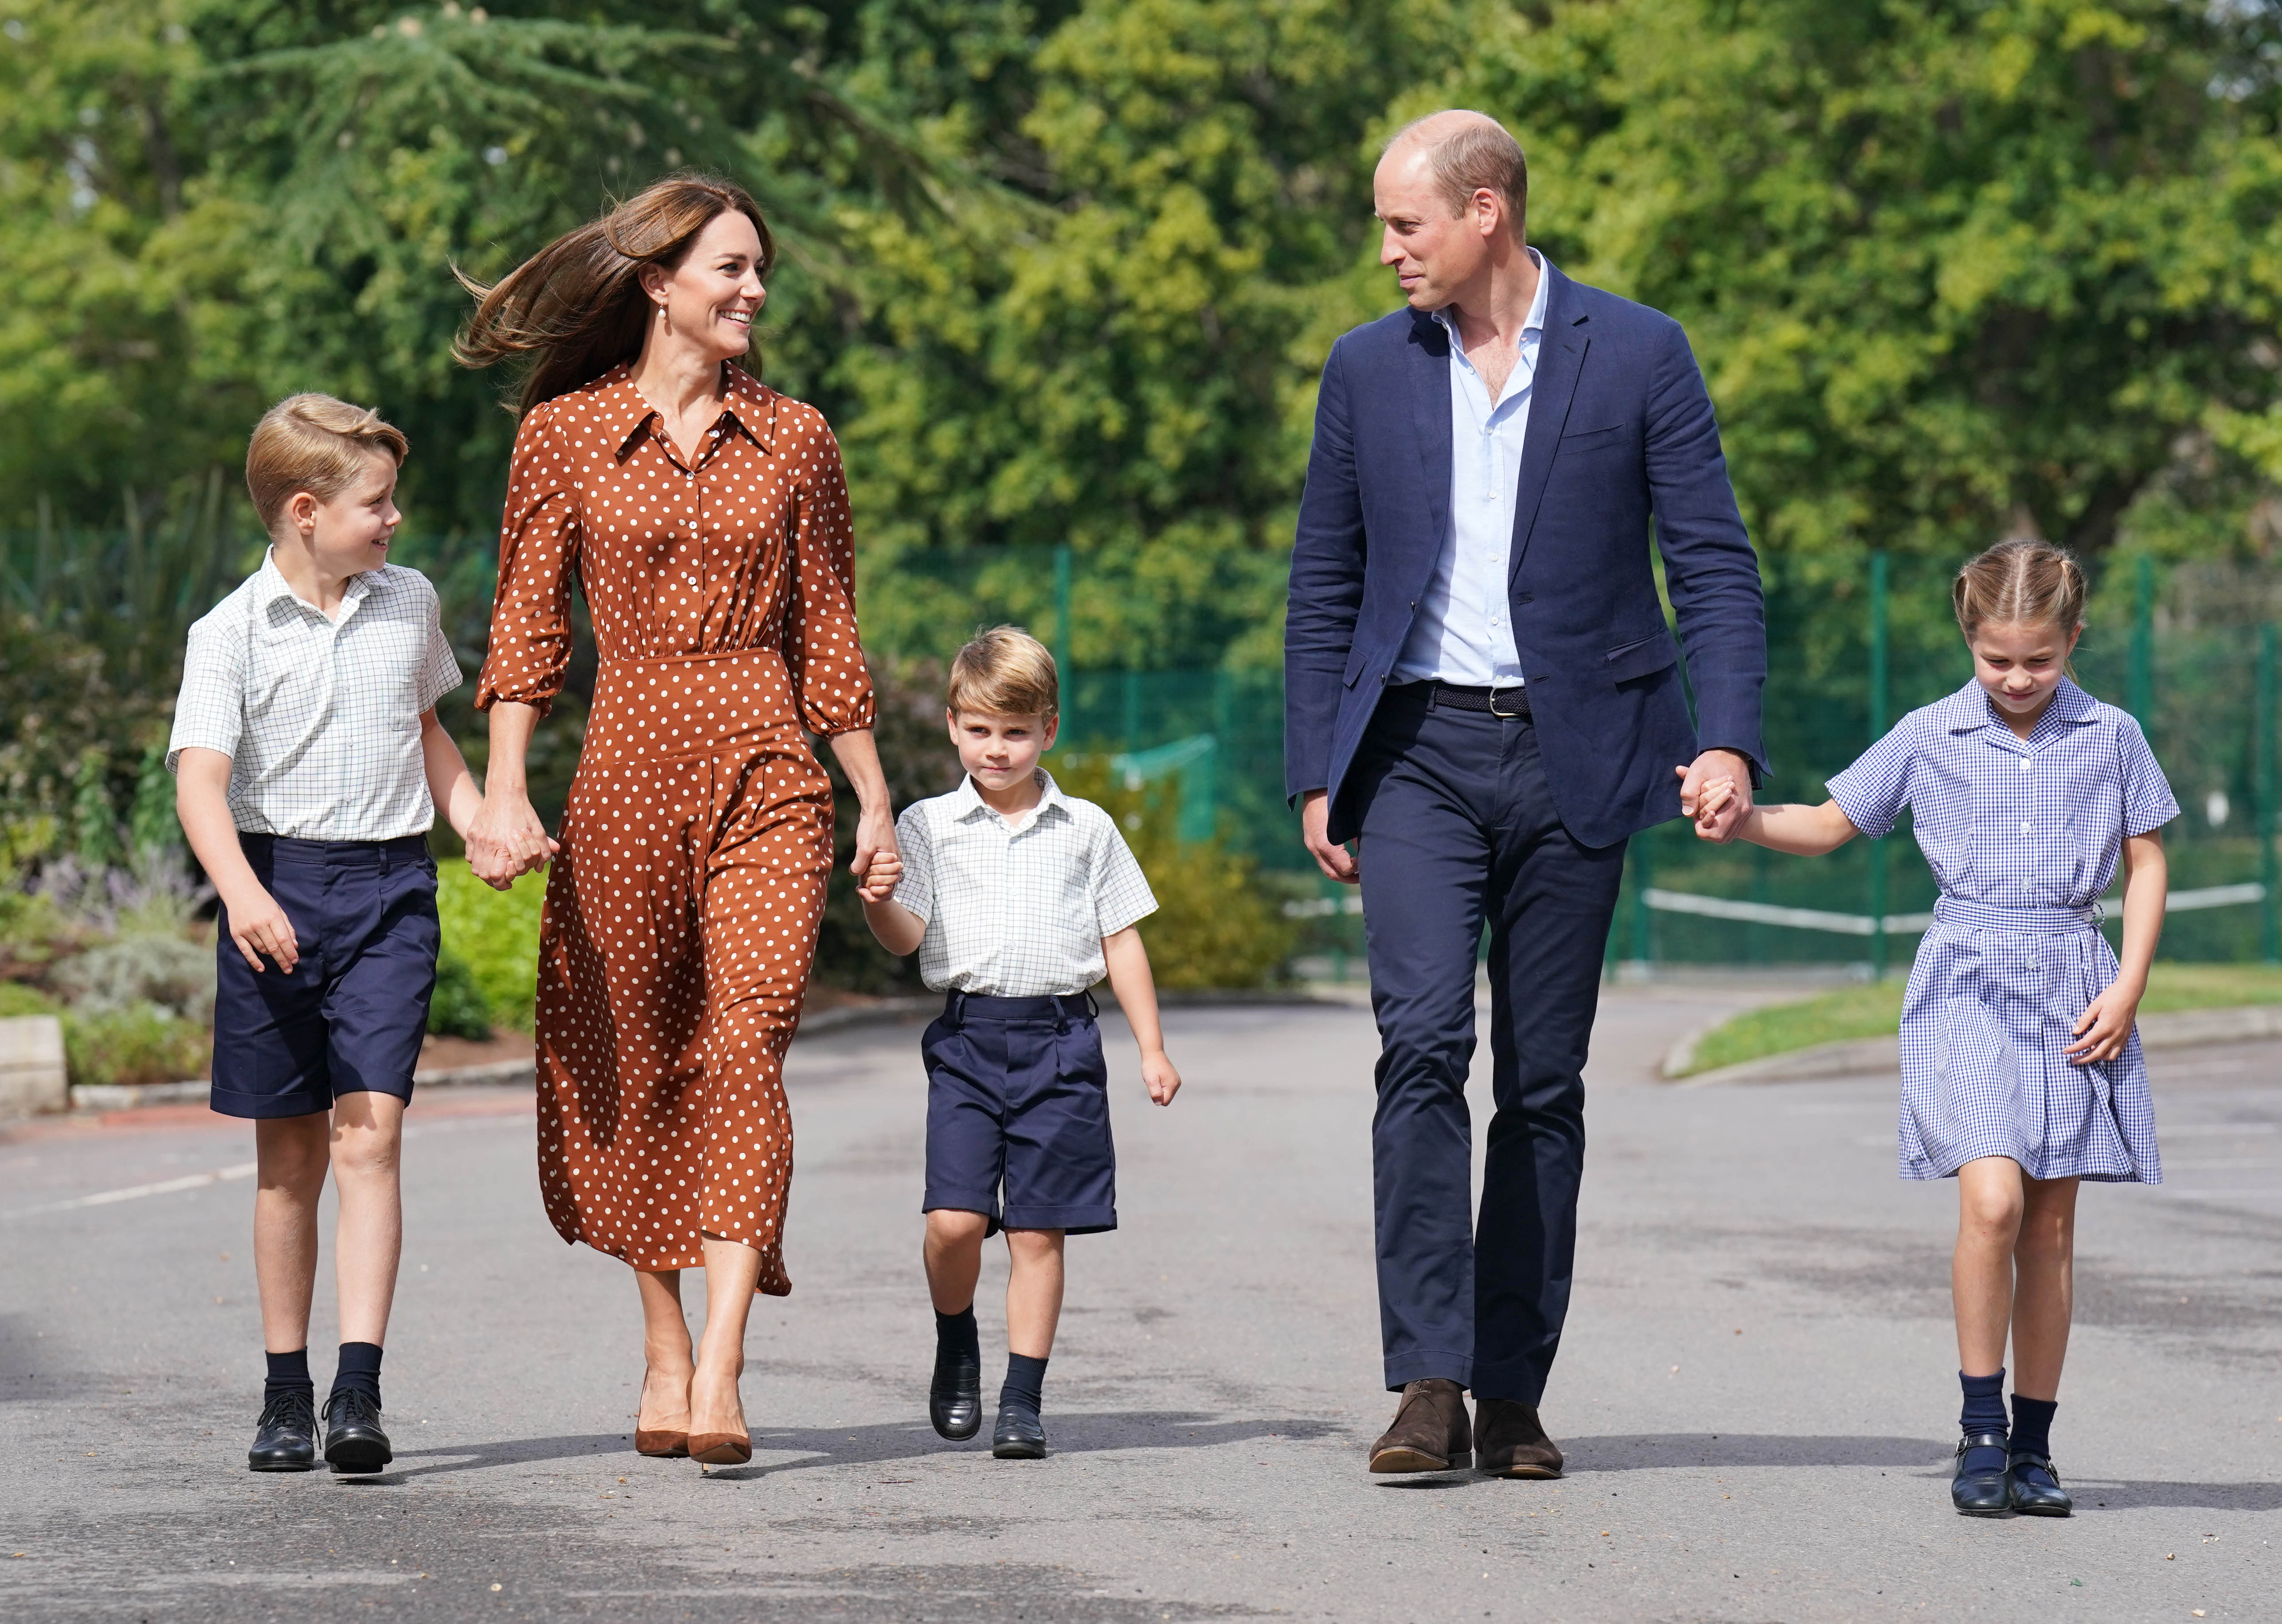 Prince George, Princess Charlotte, and Prince Louis, accompanied by their parents Prince William and Catherine, Duchess of Cambridge, arrive for a settling in afternoon at Lambrook School, near Ascot, on September 7, 2022, in Bracknell, England. | Source: Getty Images